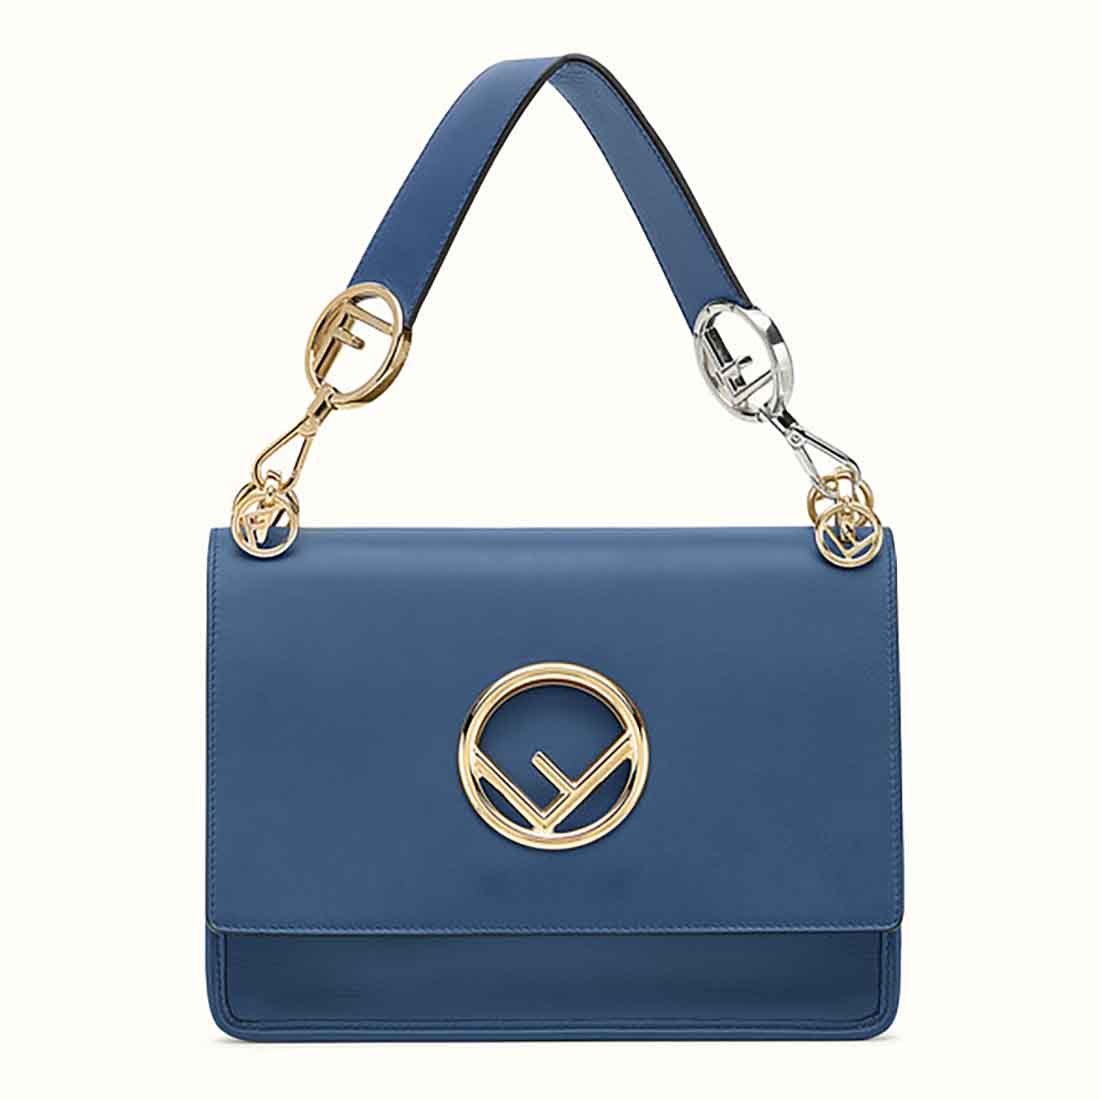 Fendi KAN I F Top Flap Leather Bag with Strap-Navy Blue